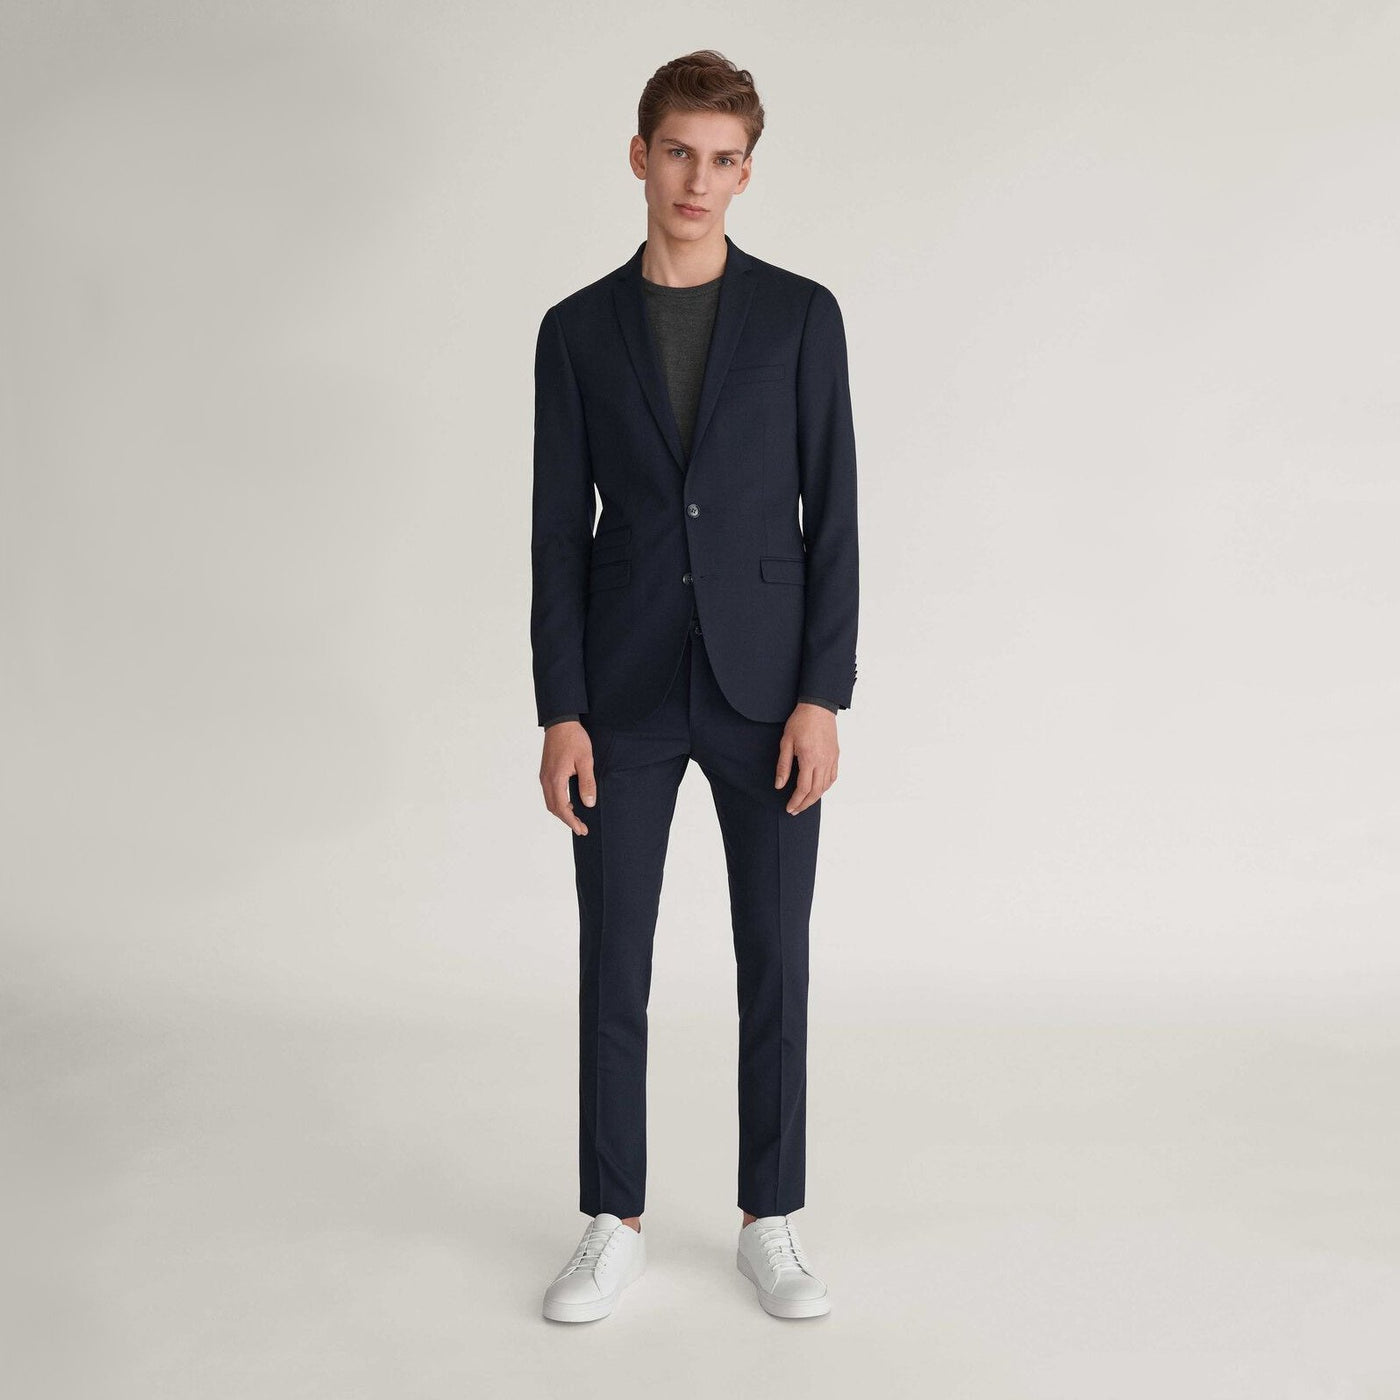 Gotstyle Fashion - Tiger Of Sweden Suits Solid Wool Slim Fit Suit Separates - Navy